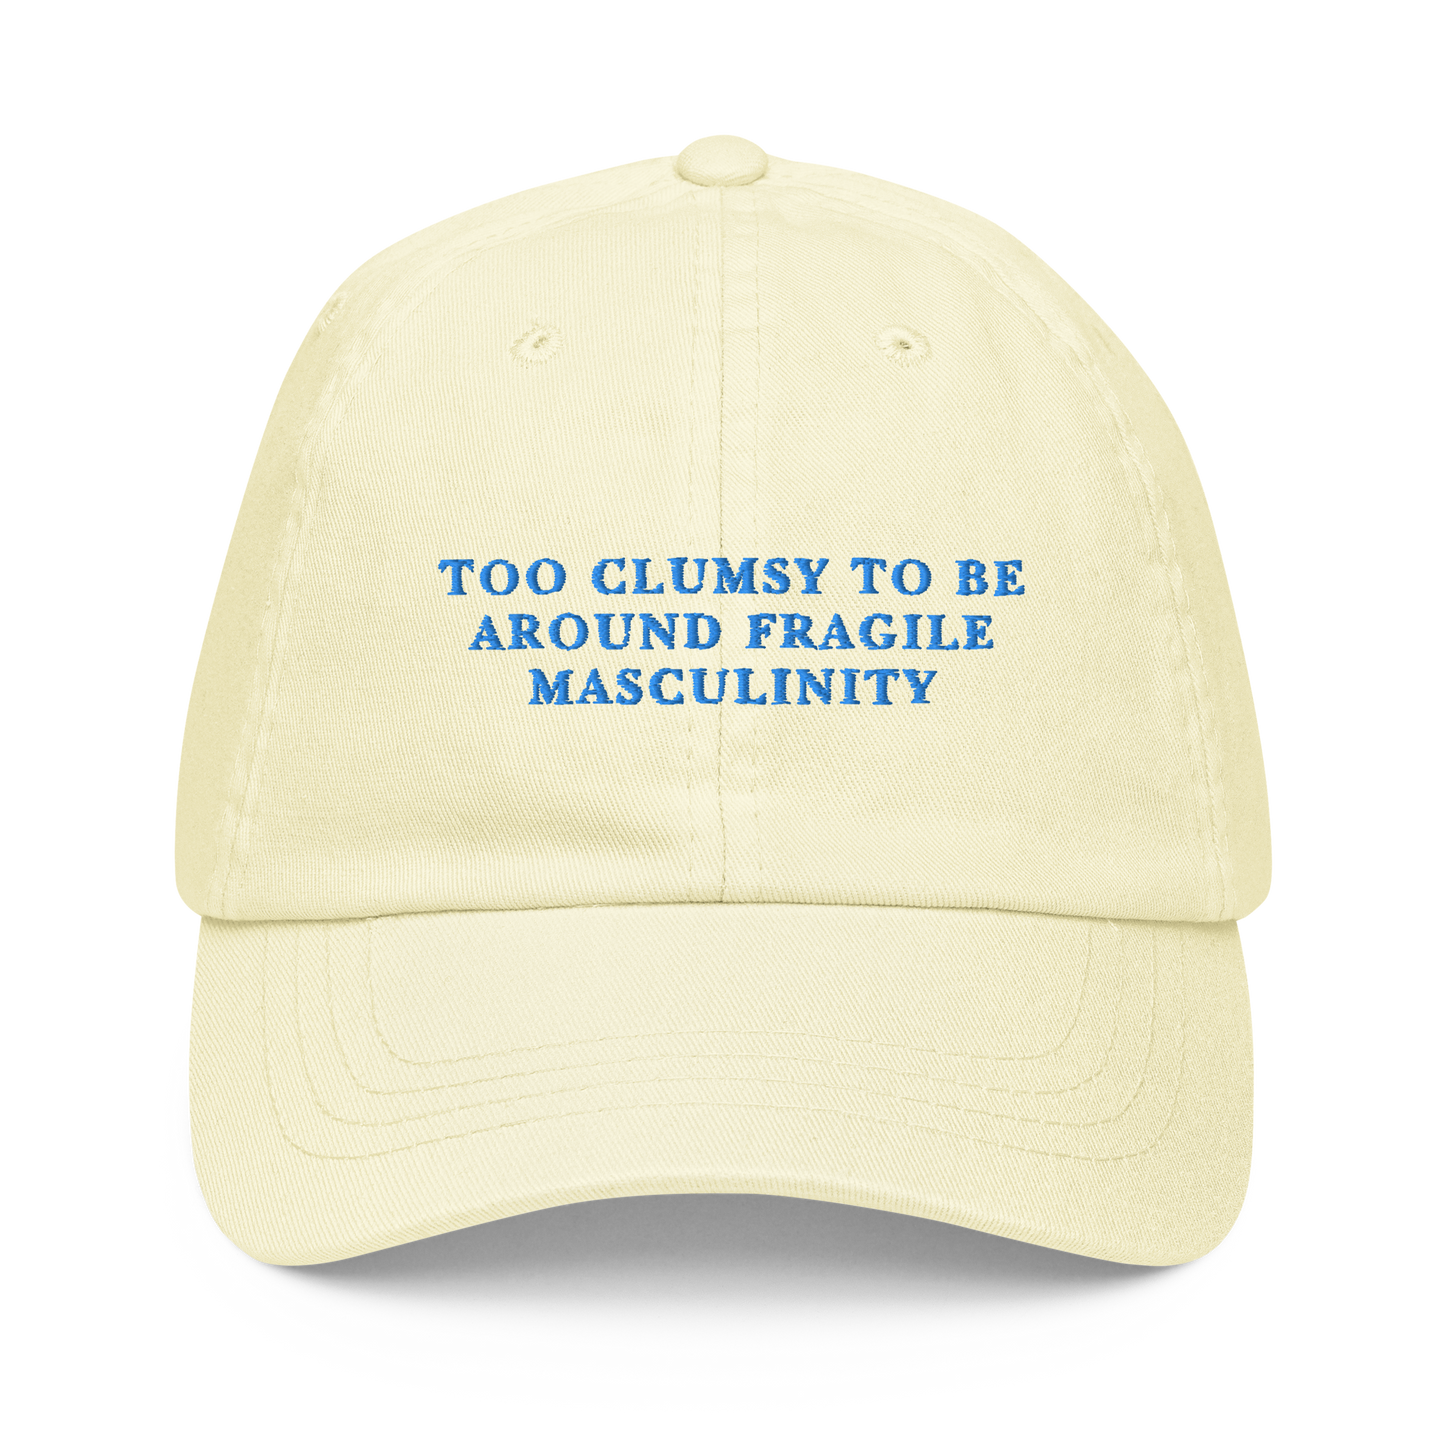 Too Clumsy To Be Around Fragile Masculinity Embroidered Pastel Baseball Cap